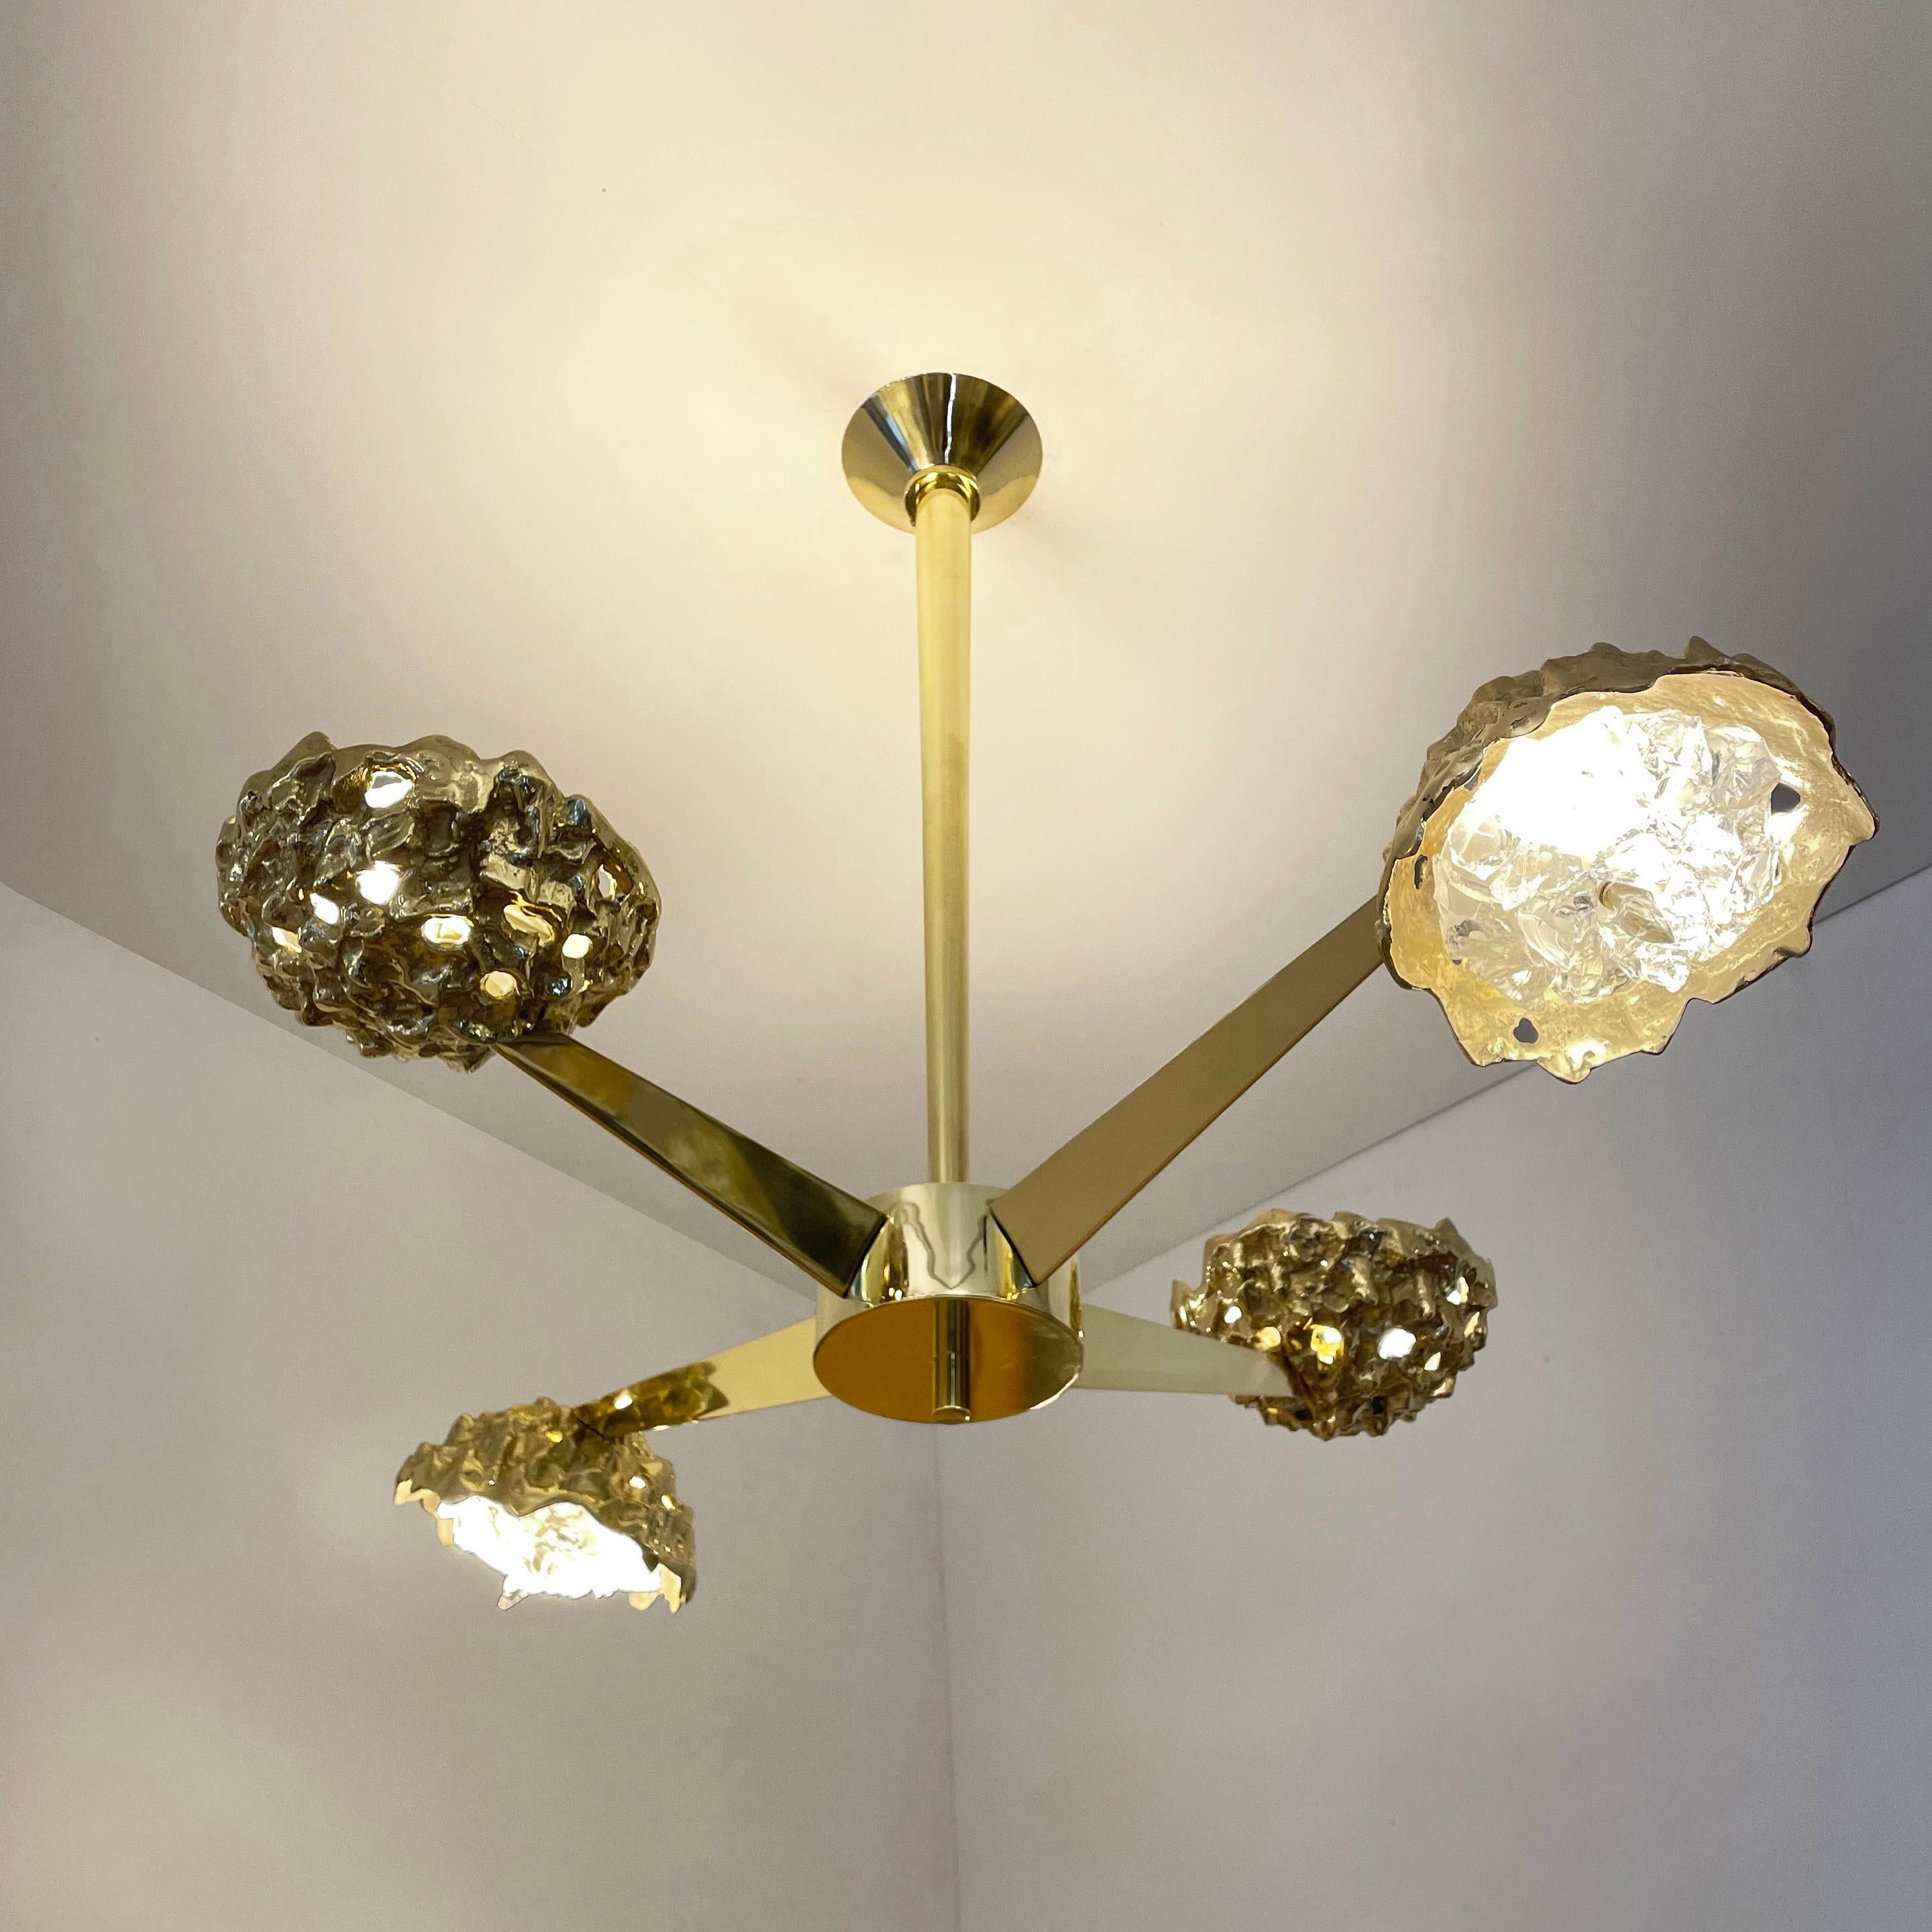 The Fusione N.4 ceiling fixture highlights the contrast between organic forms and sleek geometric lines; Cast brass shades with irregular glass crystals sprout from polished V shaped arms. Shown in polished brass with clear glass. See the Fusione